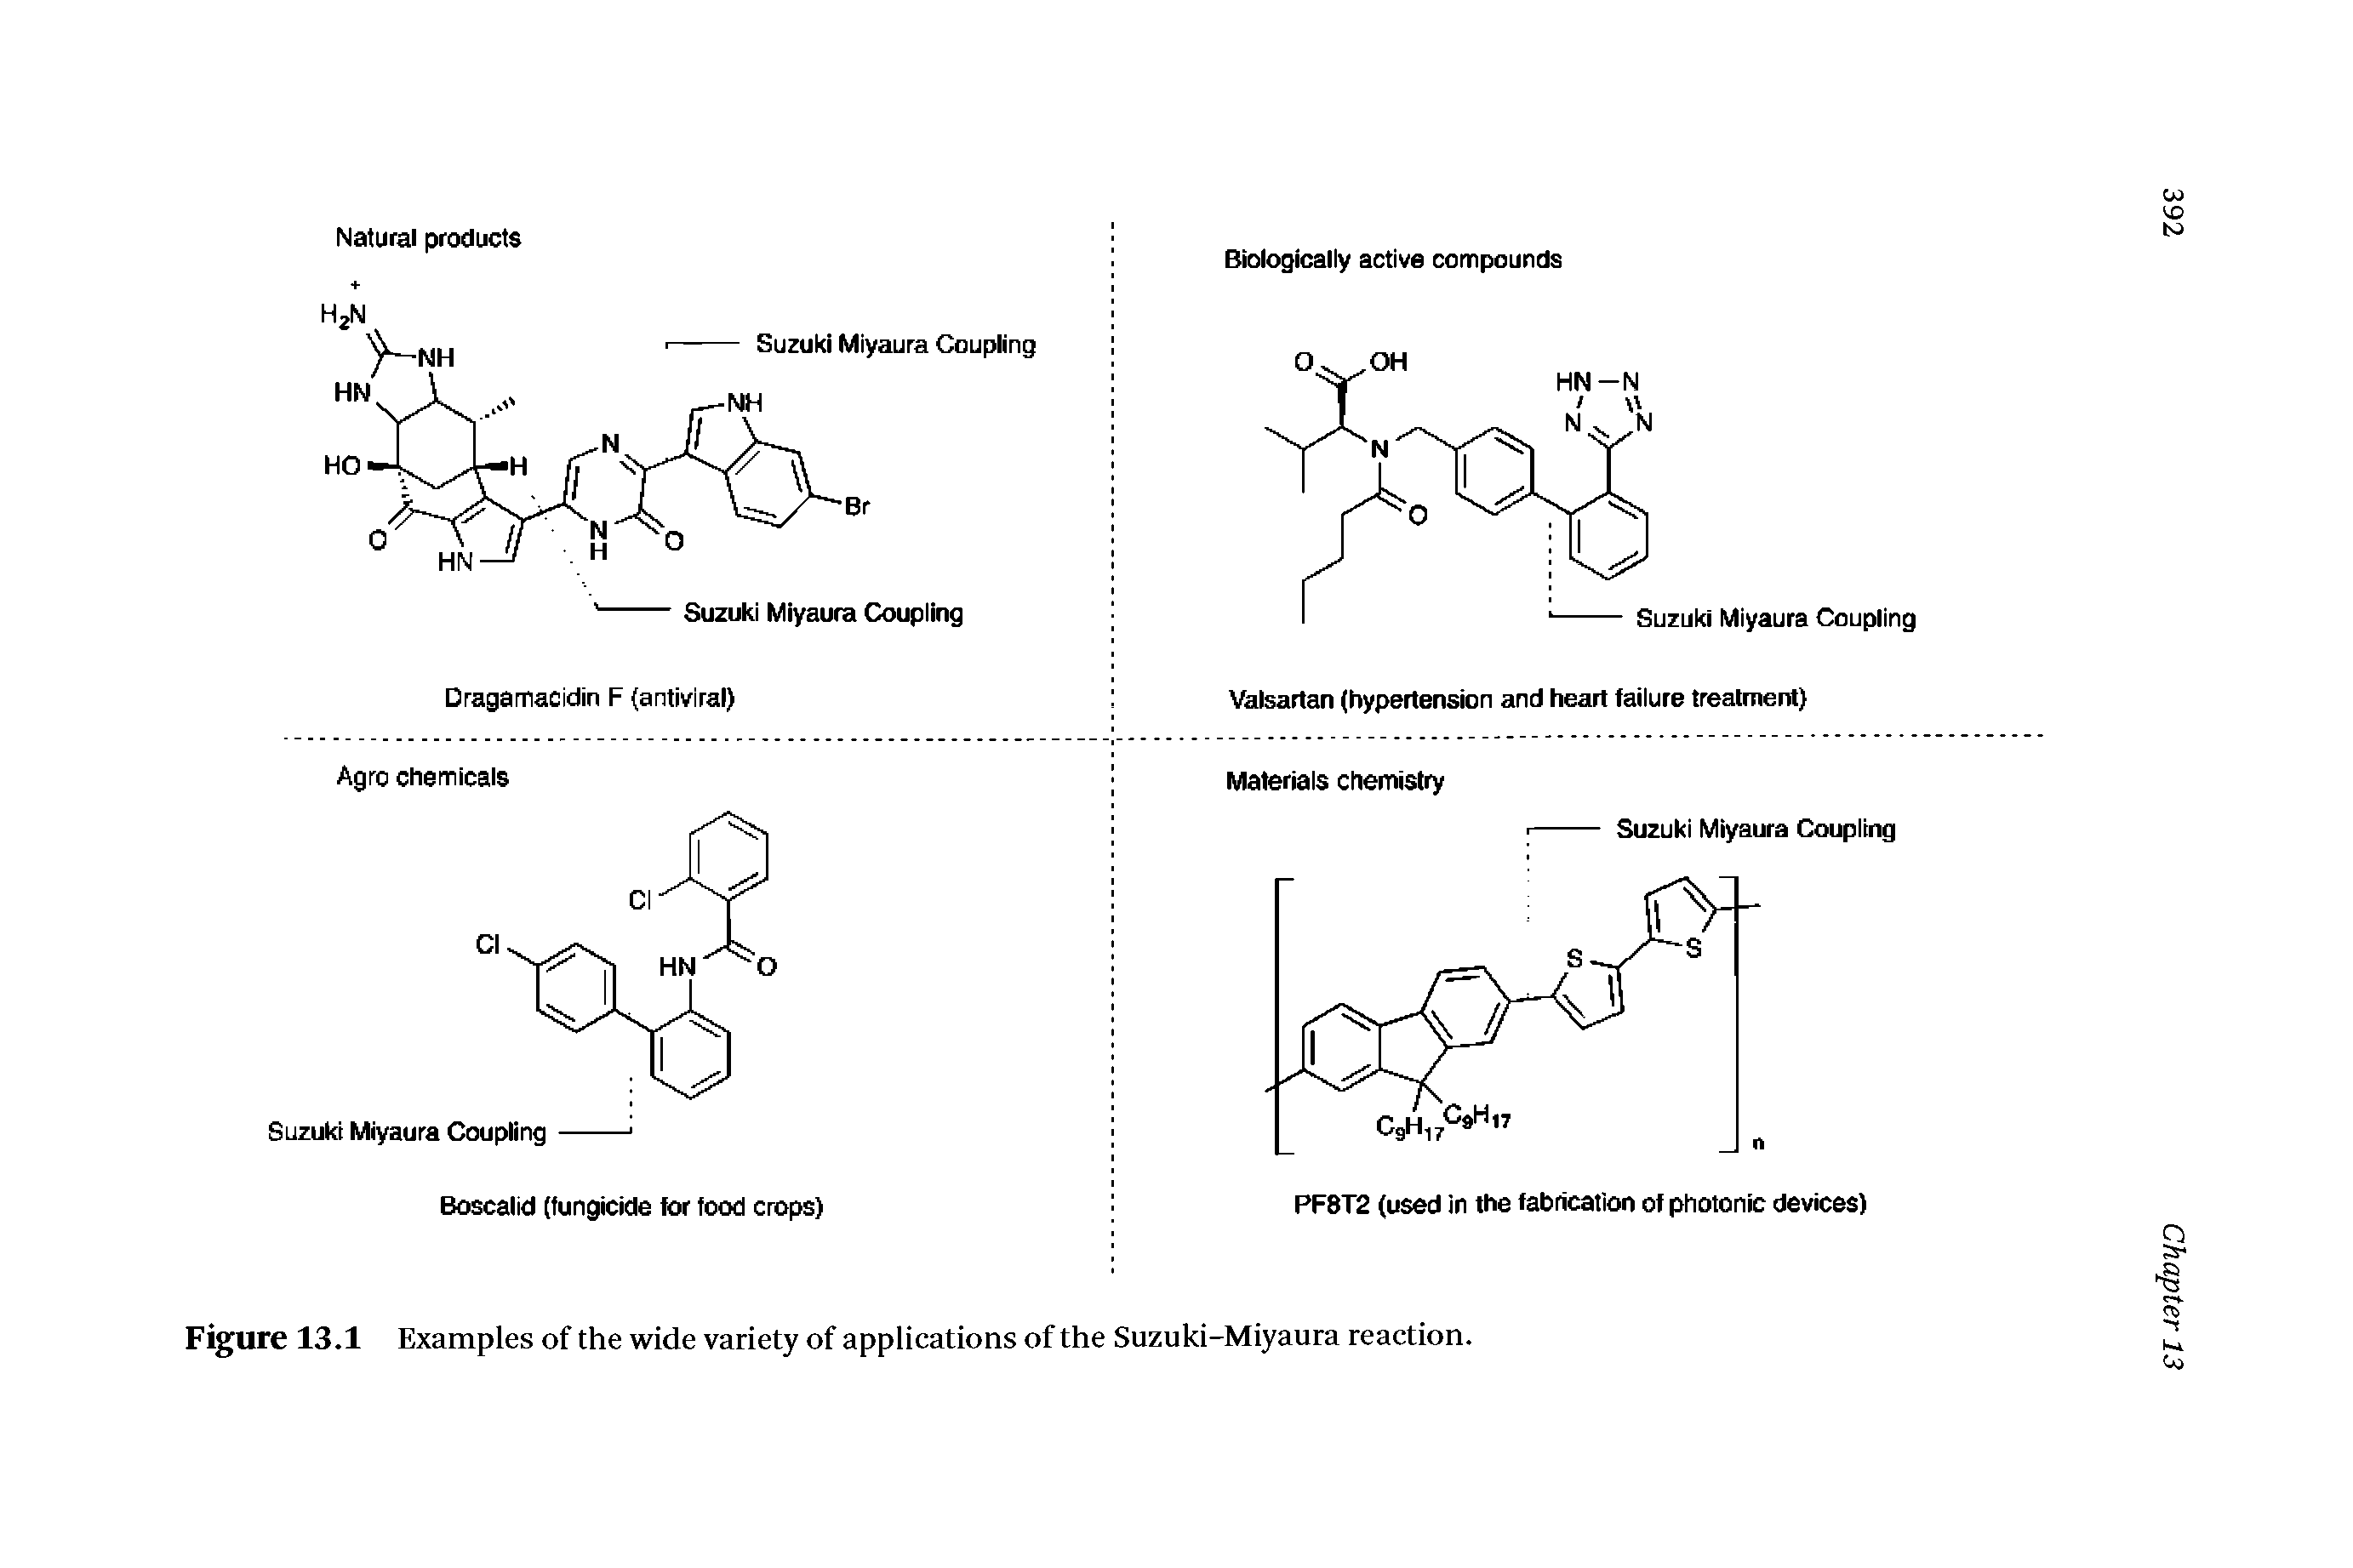 Figure 13.1 Examples of the wide variety of applications of the Suzuki-Miyaura reaction.